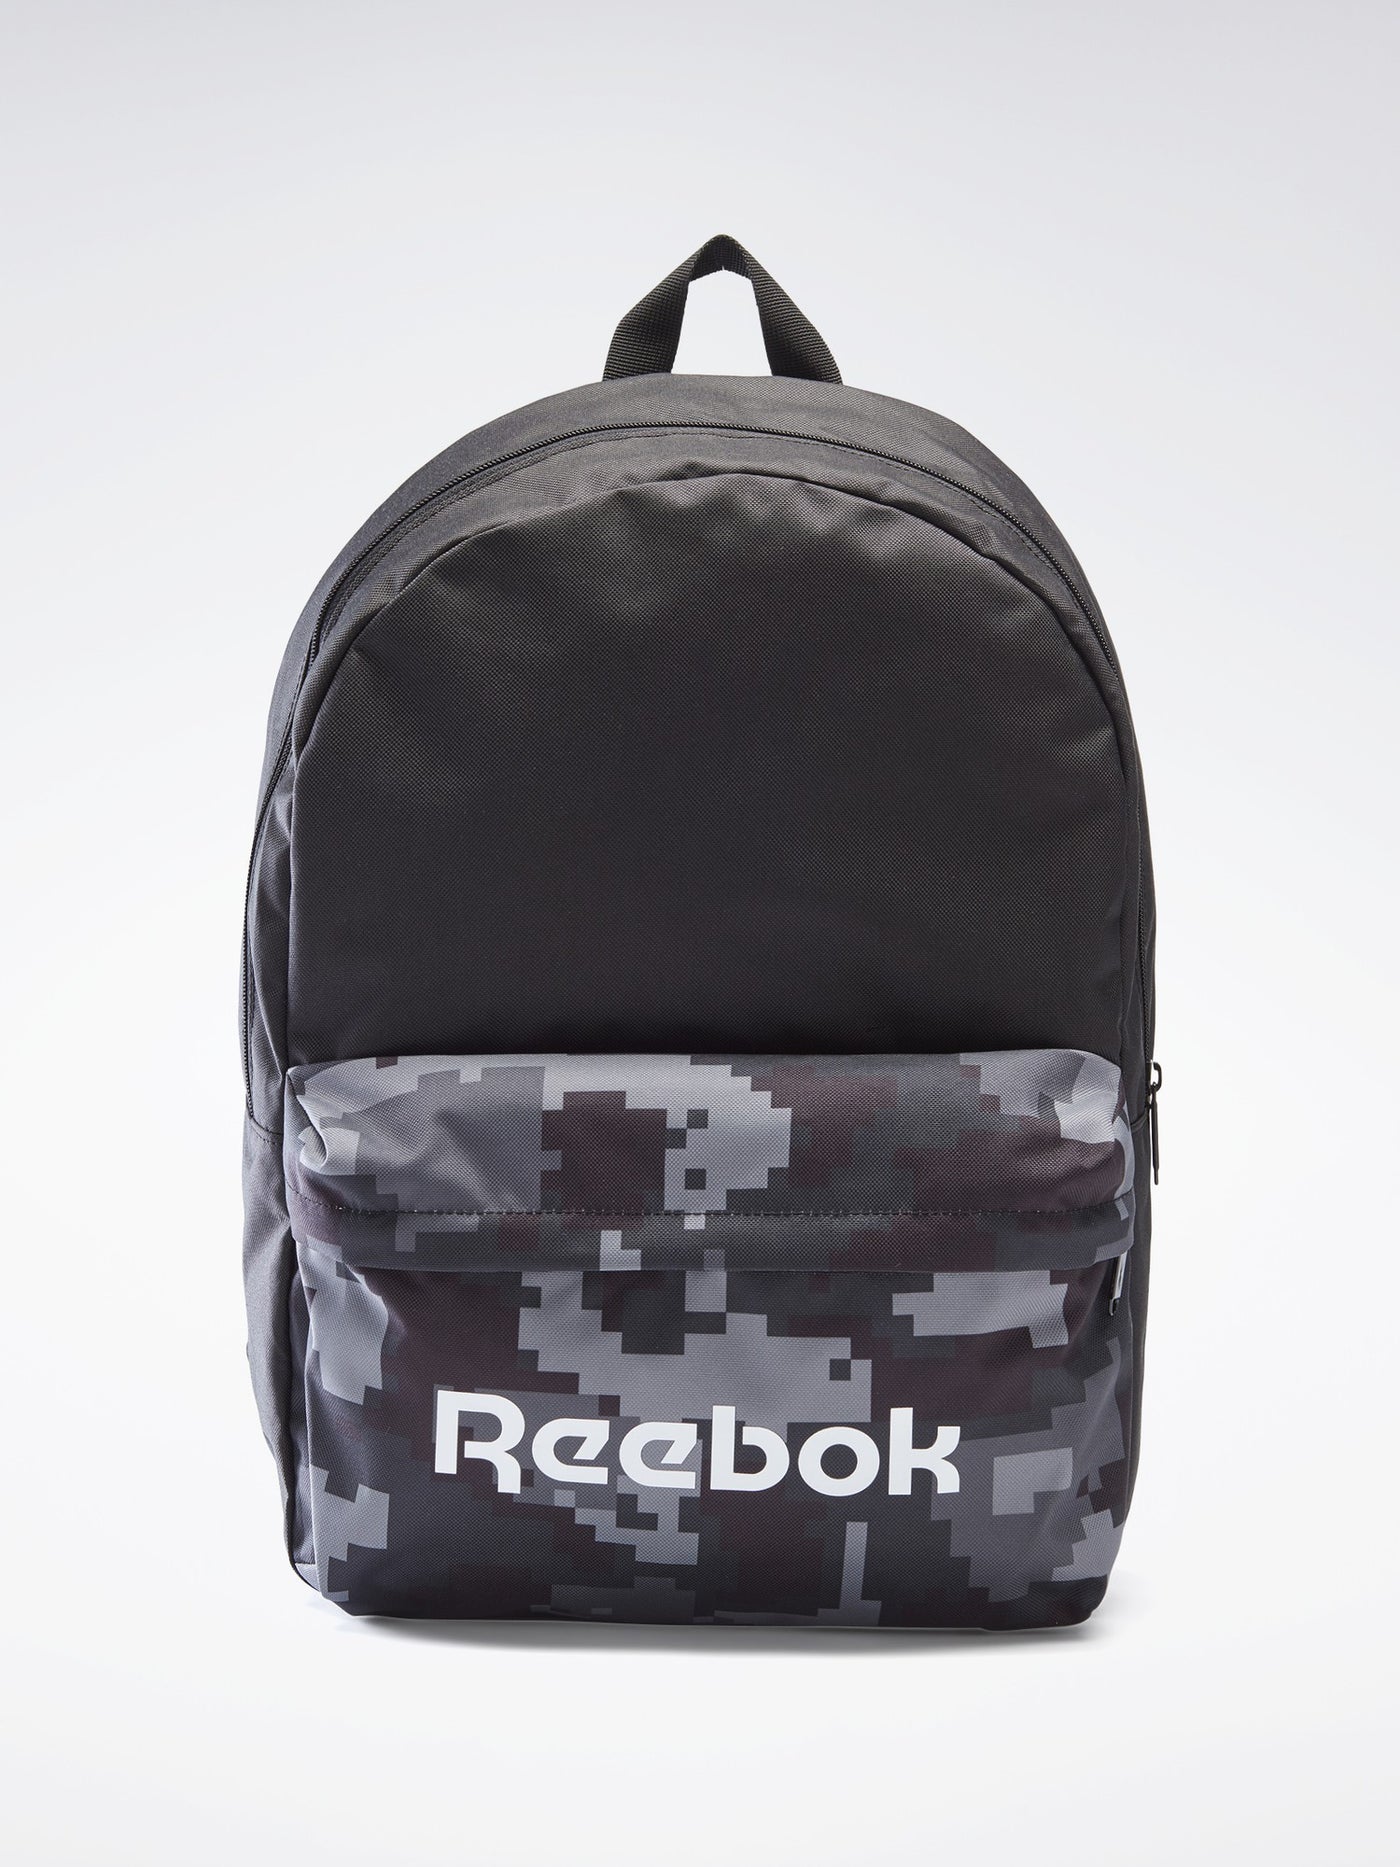 Unisex Backpack - Graphic Print